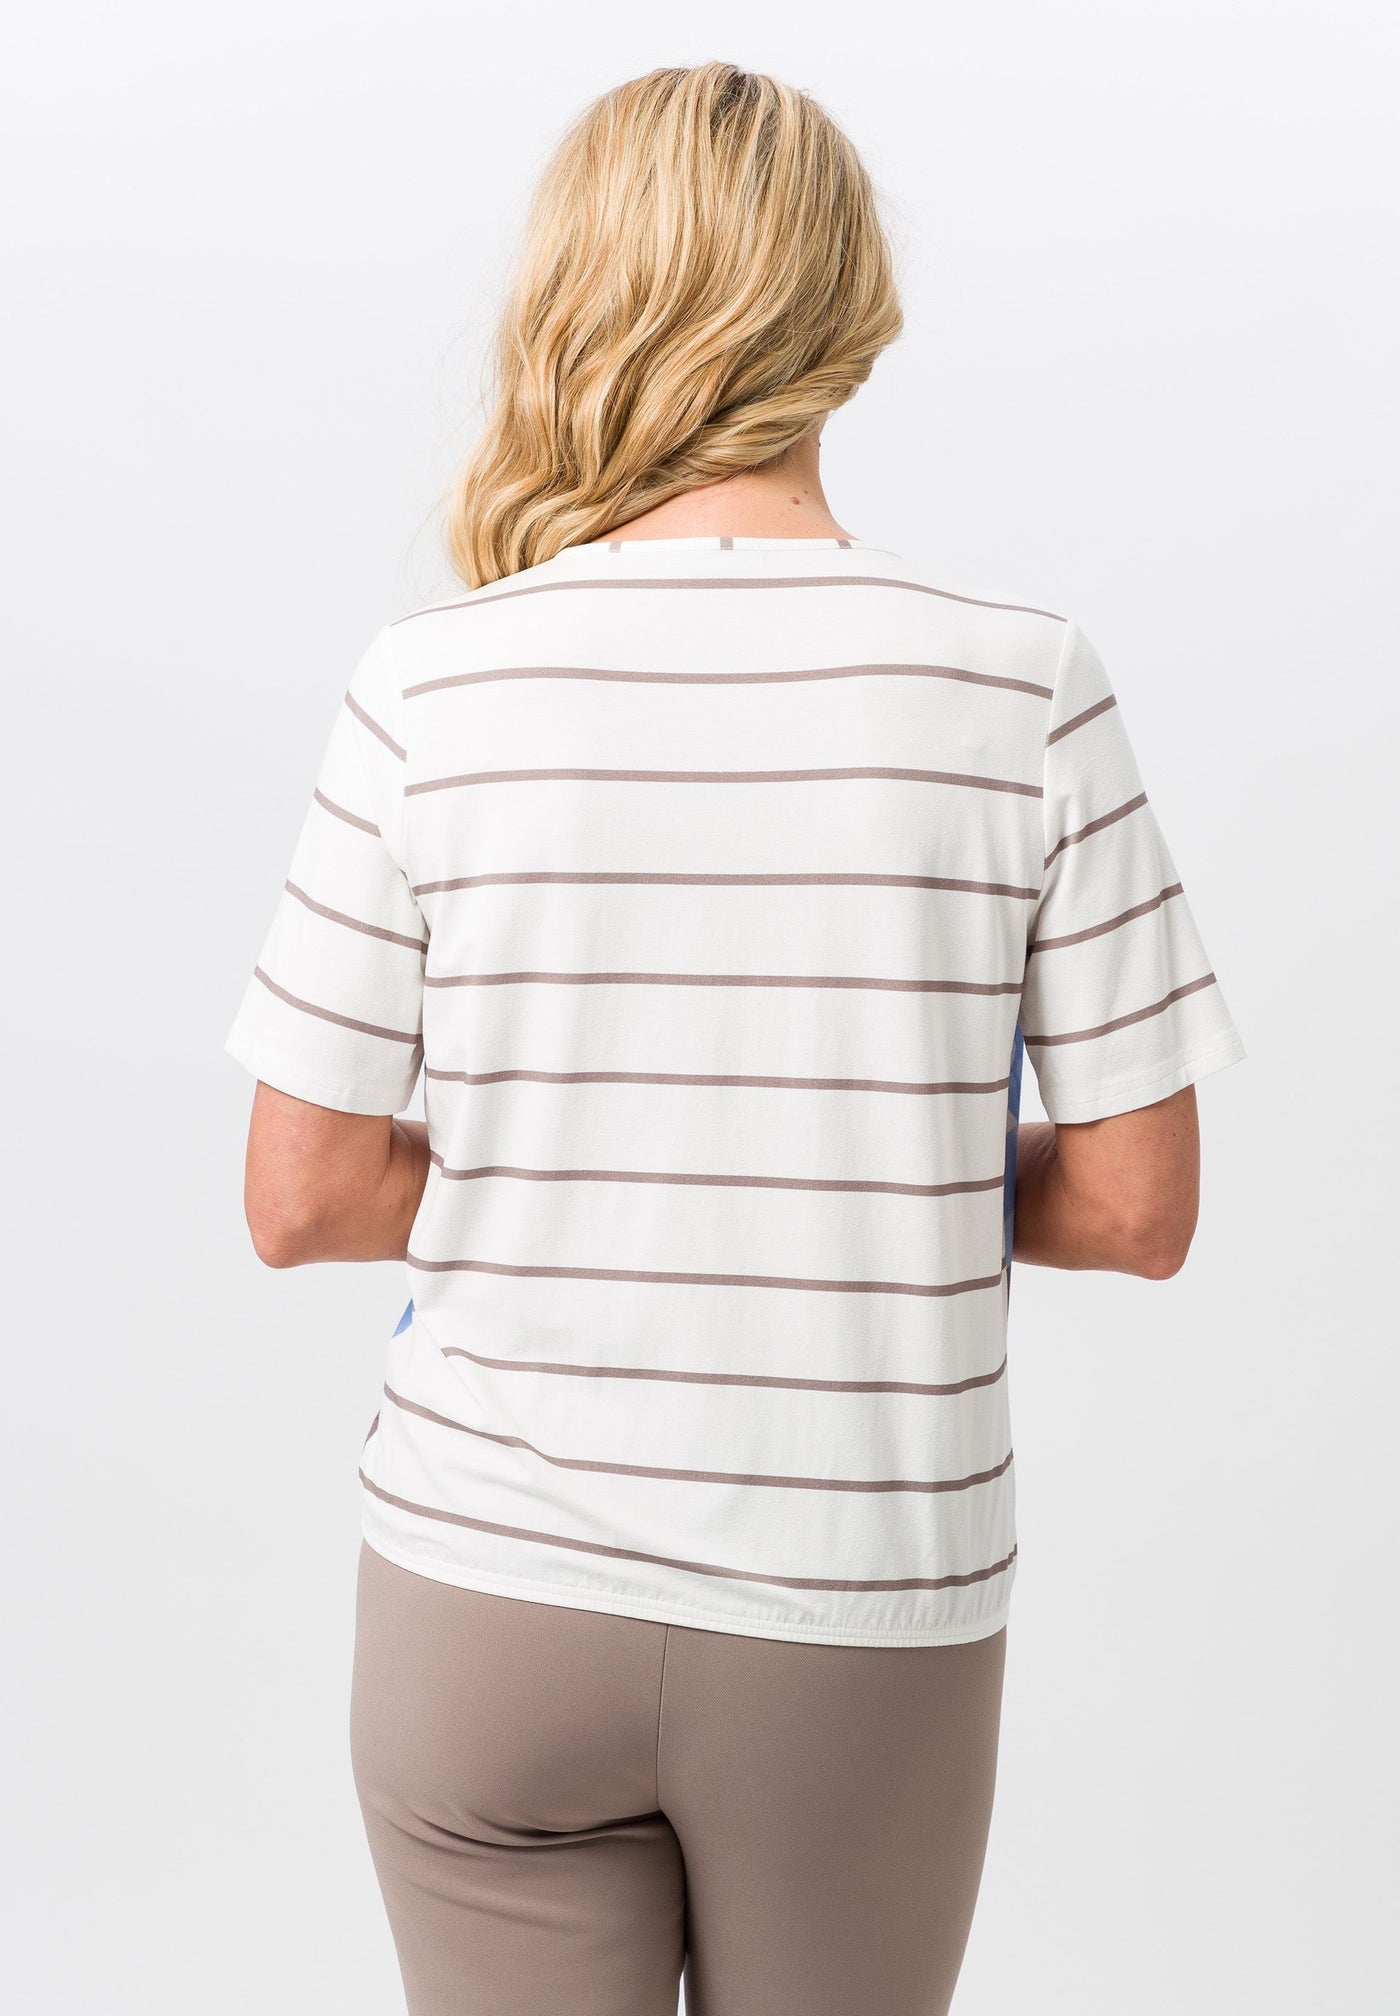 Cream Round Neck Top With Stripped Short Sleeves Blue & Brown Pattern & Elasicated Waist Detailing